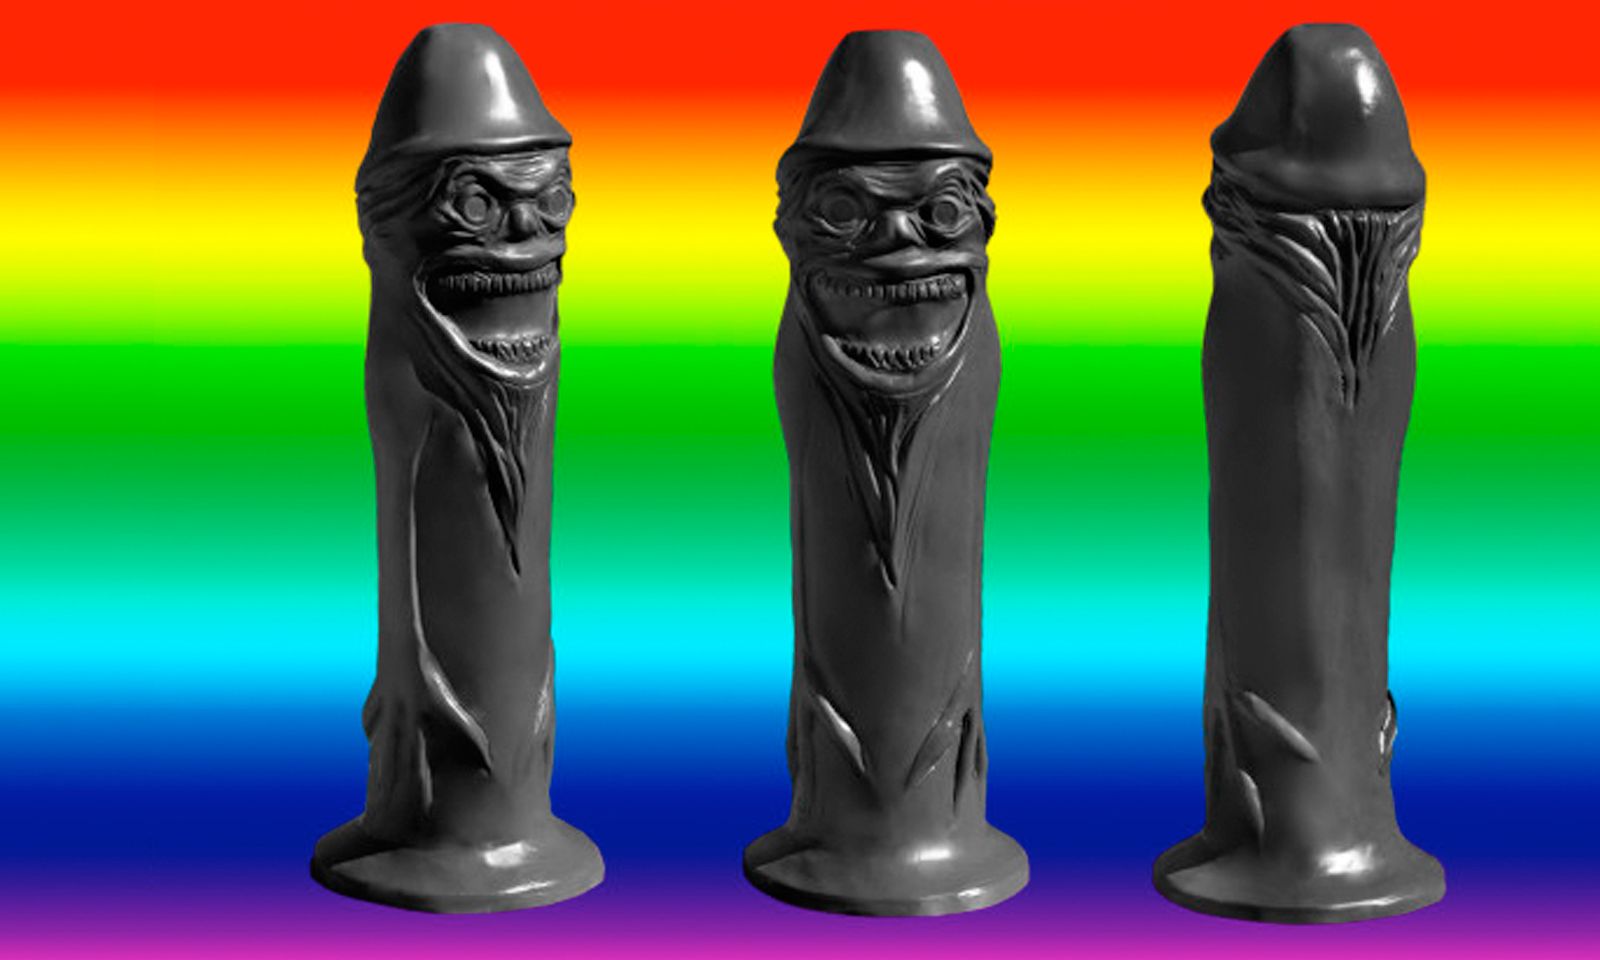 Indiegogo Set for Odd LGBTQ Icon The Babadook to Become a Dildo